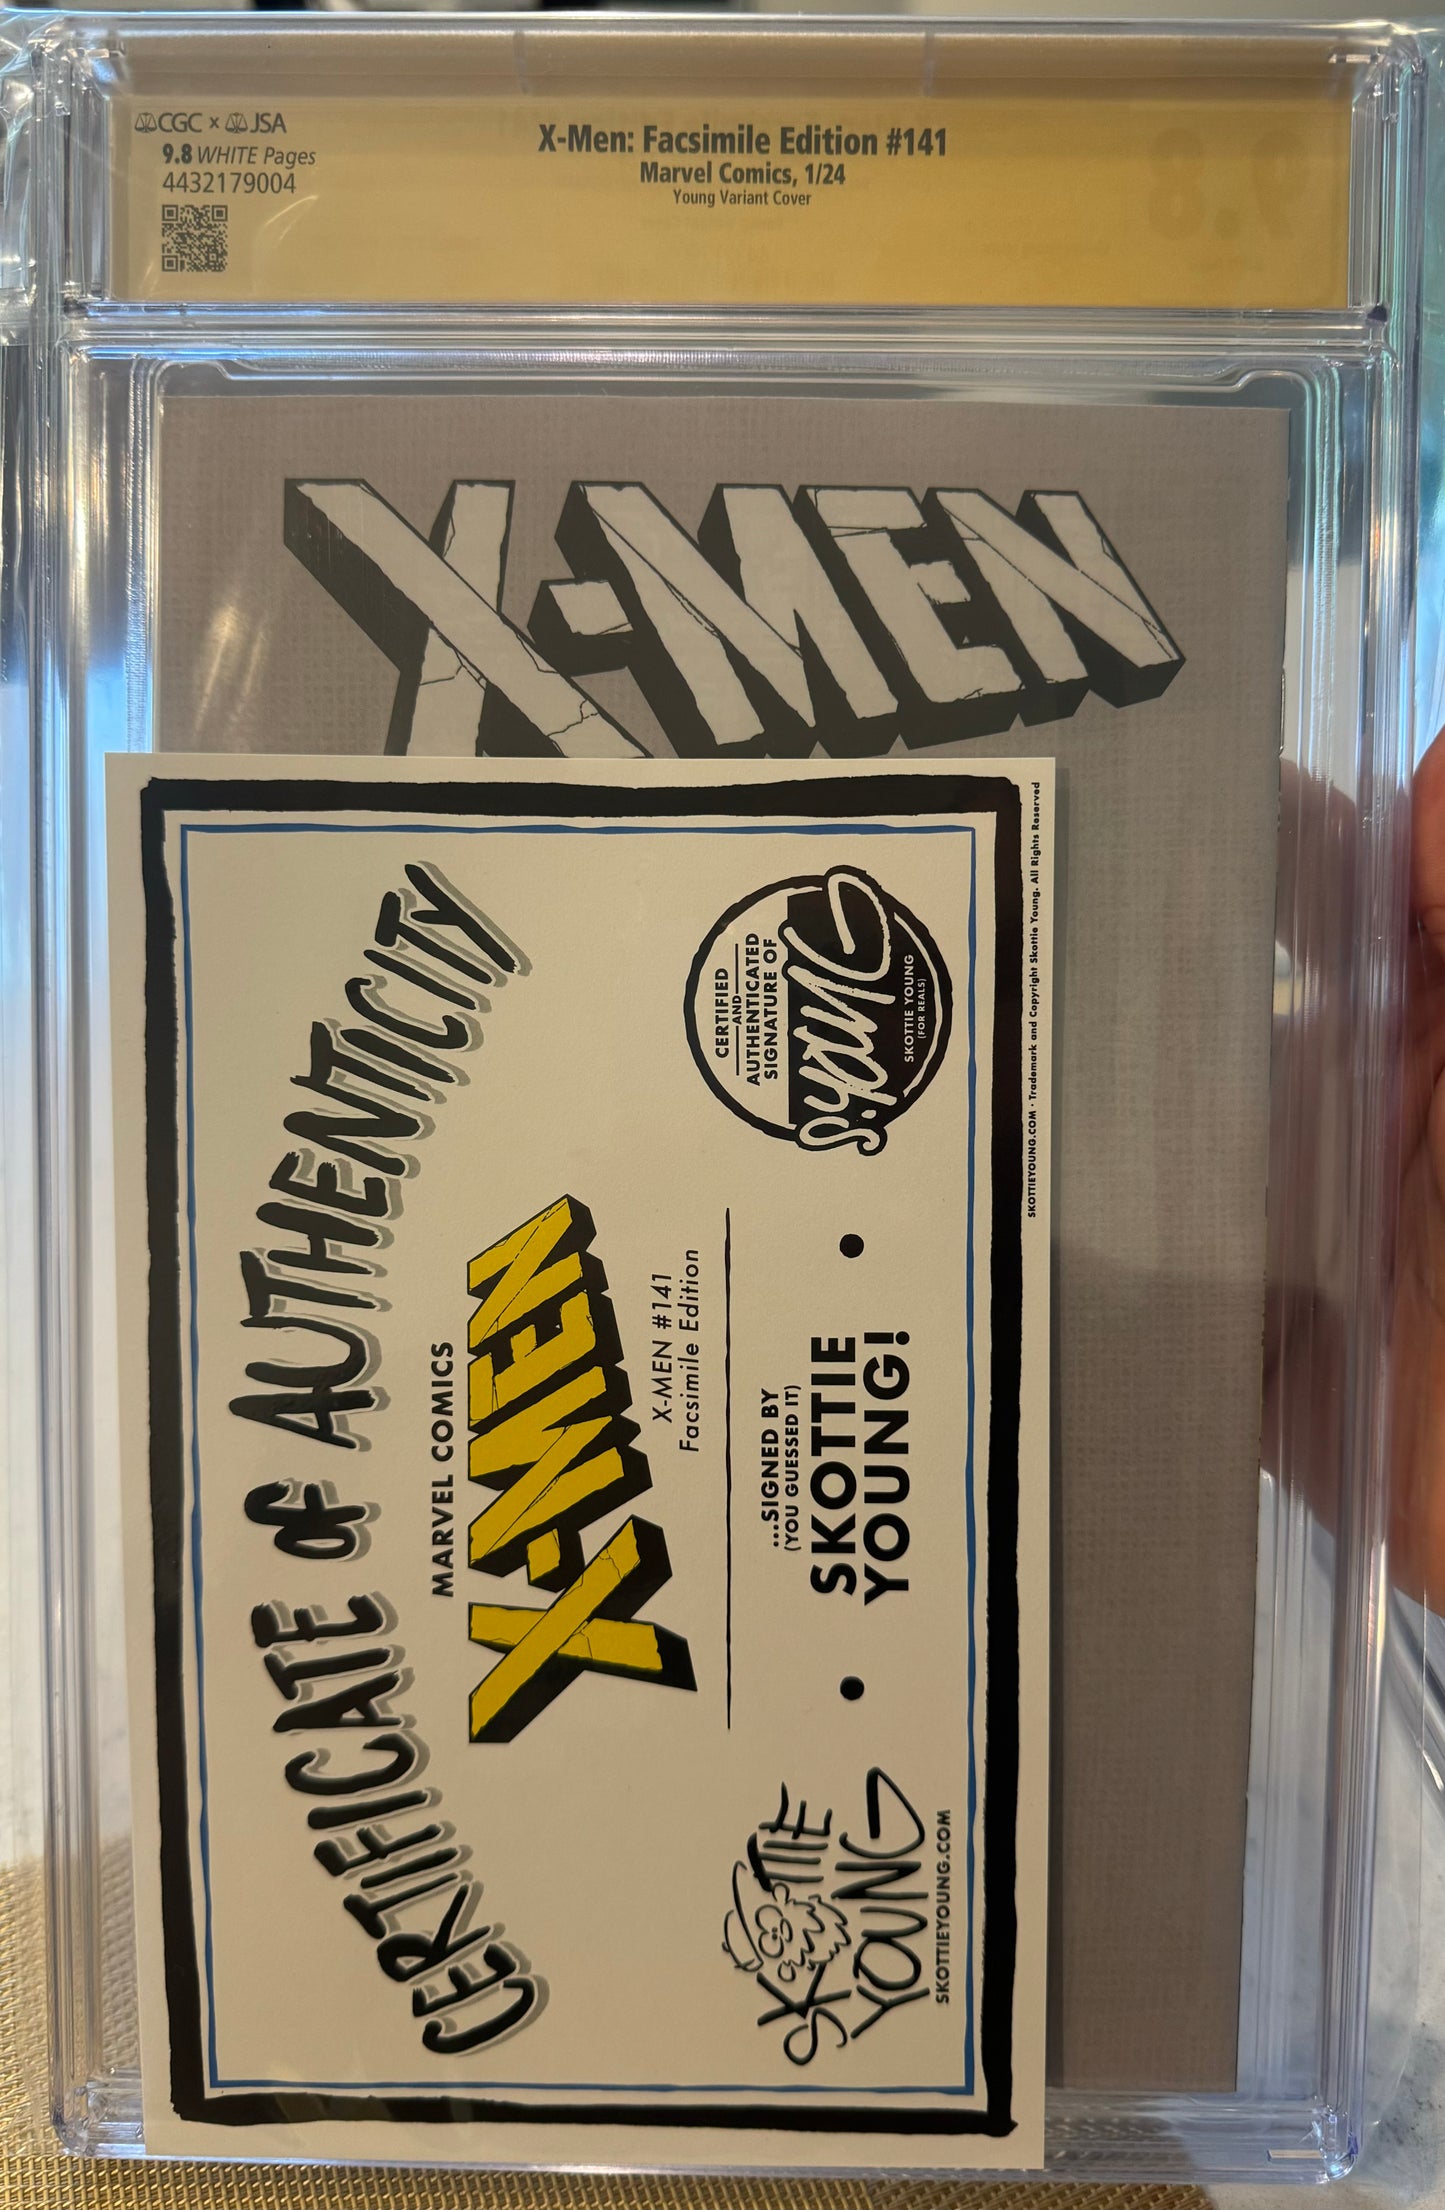 Uncanny X-Men: Facsimile Edition #141 CGC x JSA 9.8 SIGNED by Skottie Young Variant Limited to 3,000